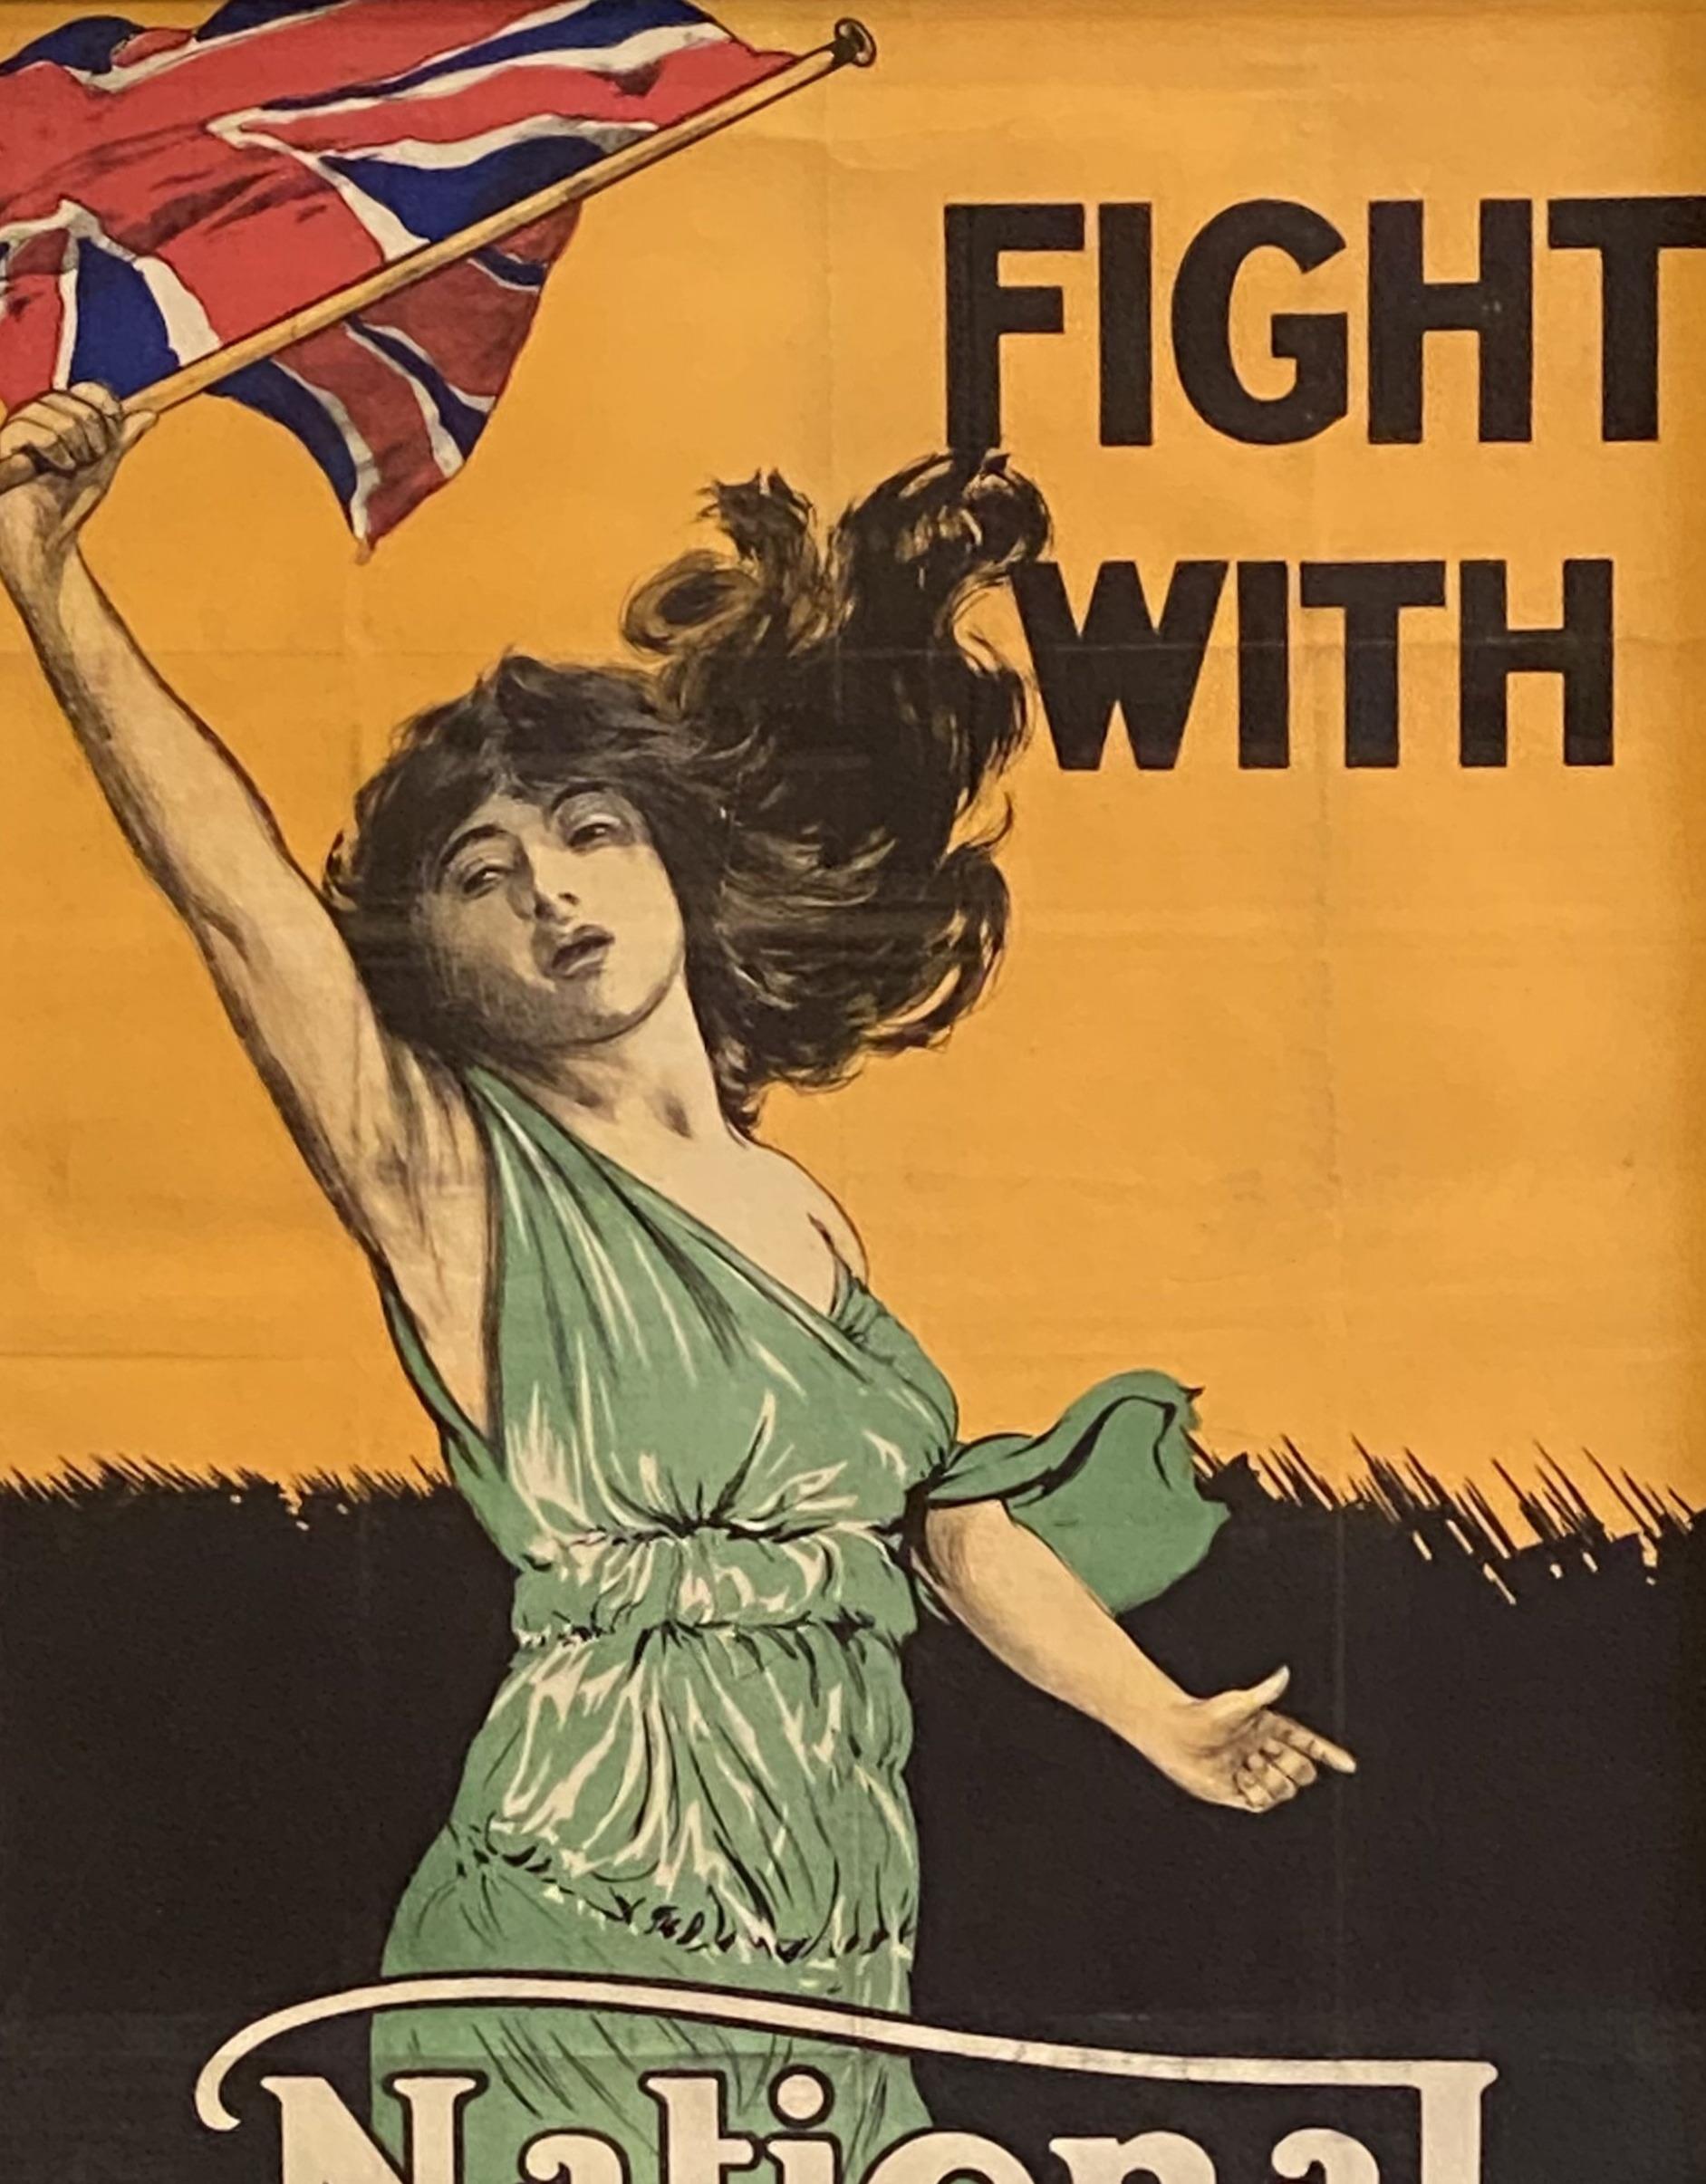 This is a vintage British WWI Poster, urging viewers to 